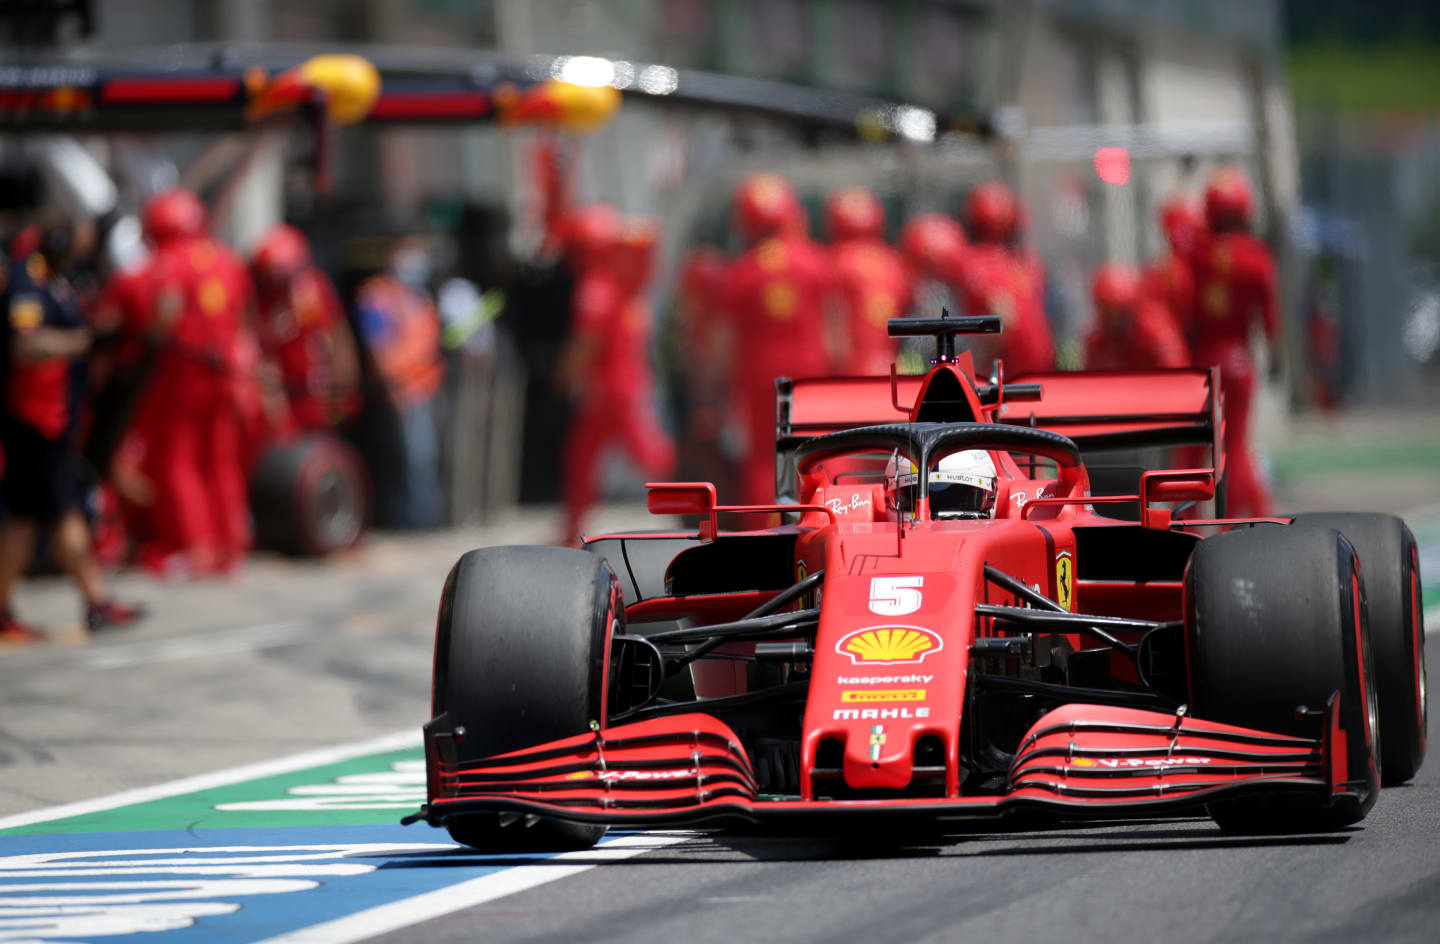 SPIELBERG, AUSTRIA - JULY 04:  Sebastian Vettel of Germany driving the (5) Scuderia Ferrari SF1000 in the pit lane during final practice for the Formula One Grand Prix of Austria at Red Bull Ring on July 04, 2020 in Spielberg, Austria. (Photo by Peter Fox/Getty Images)